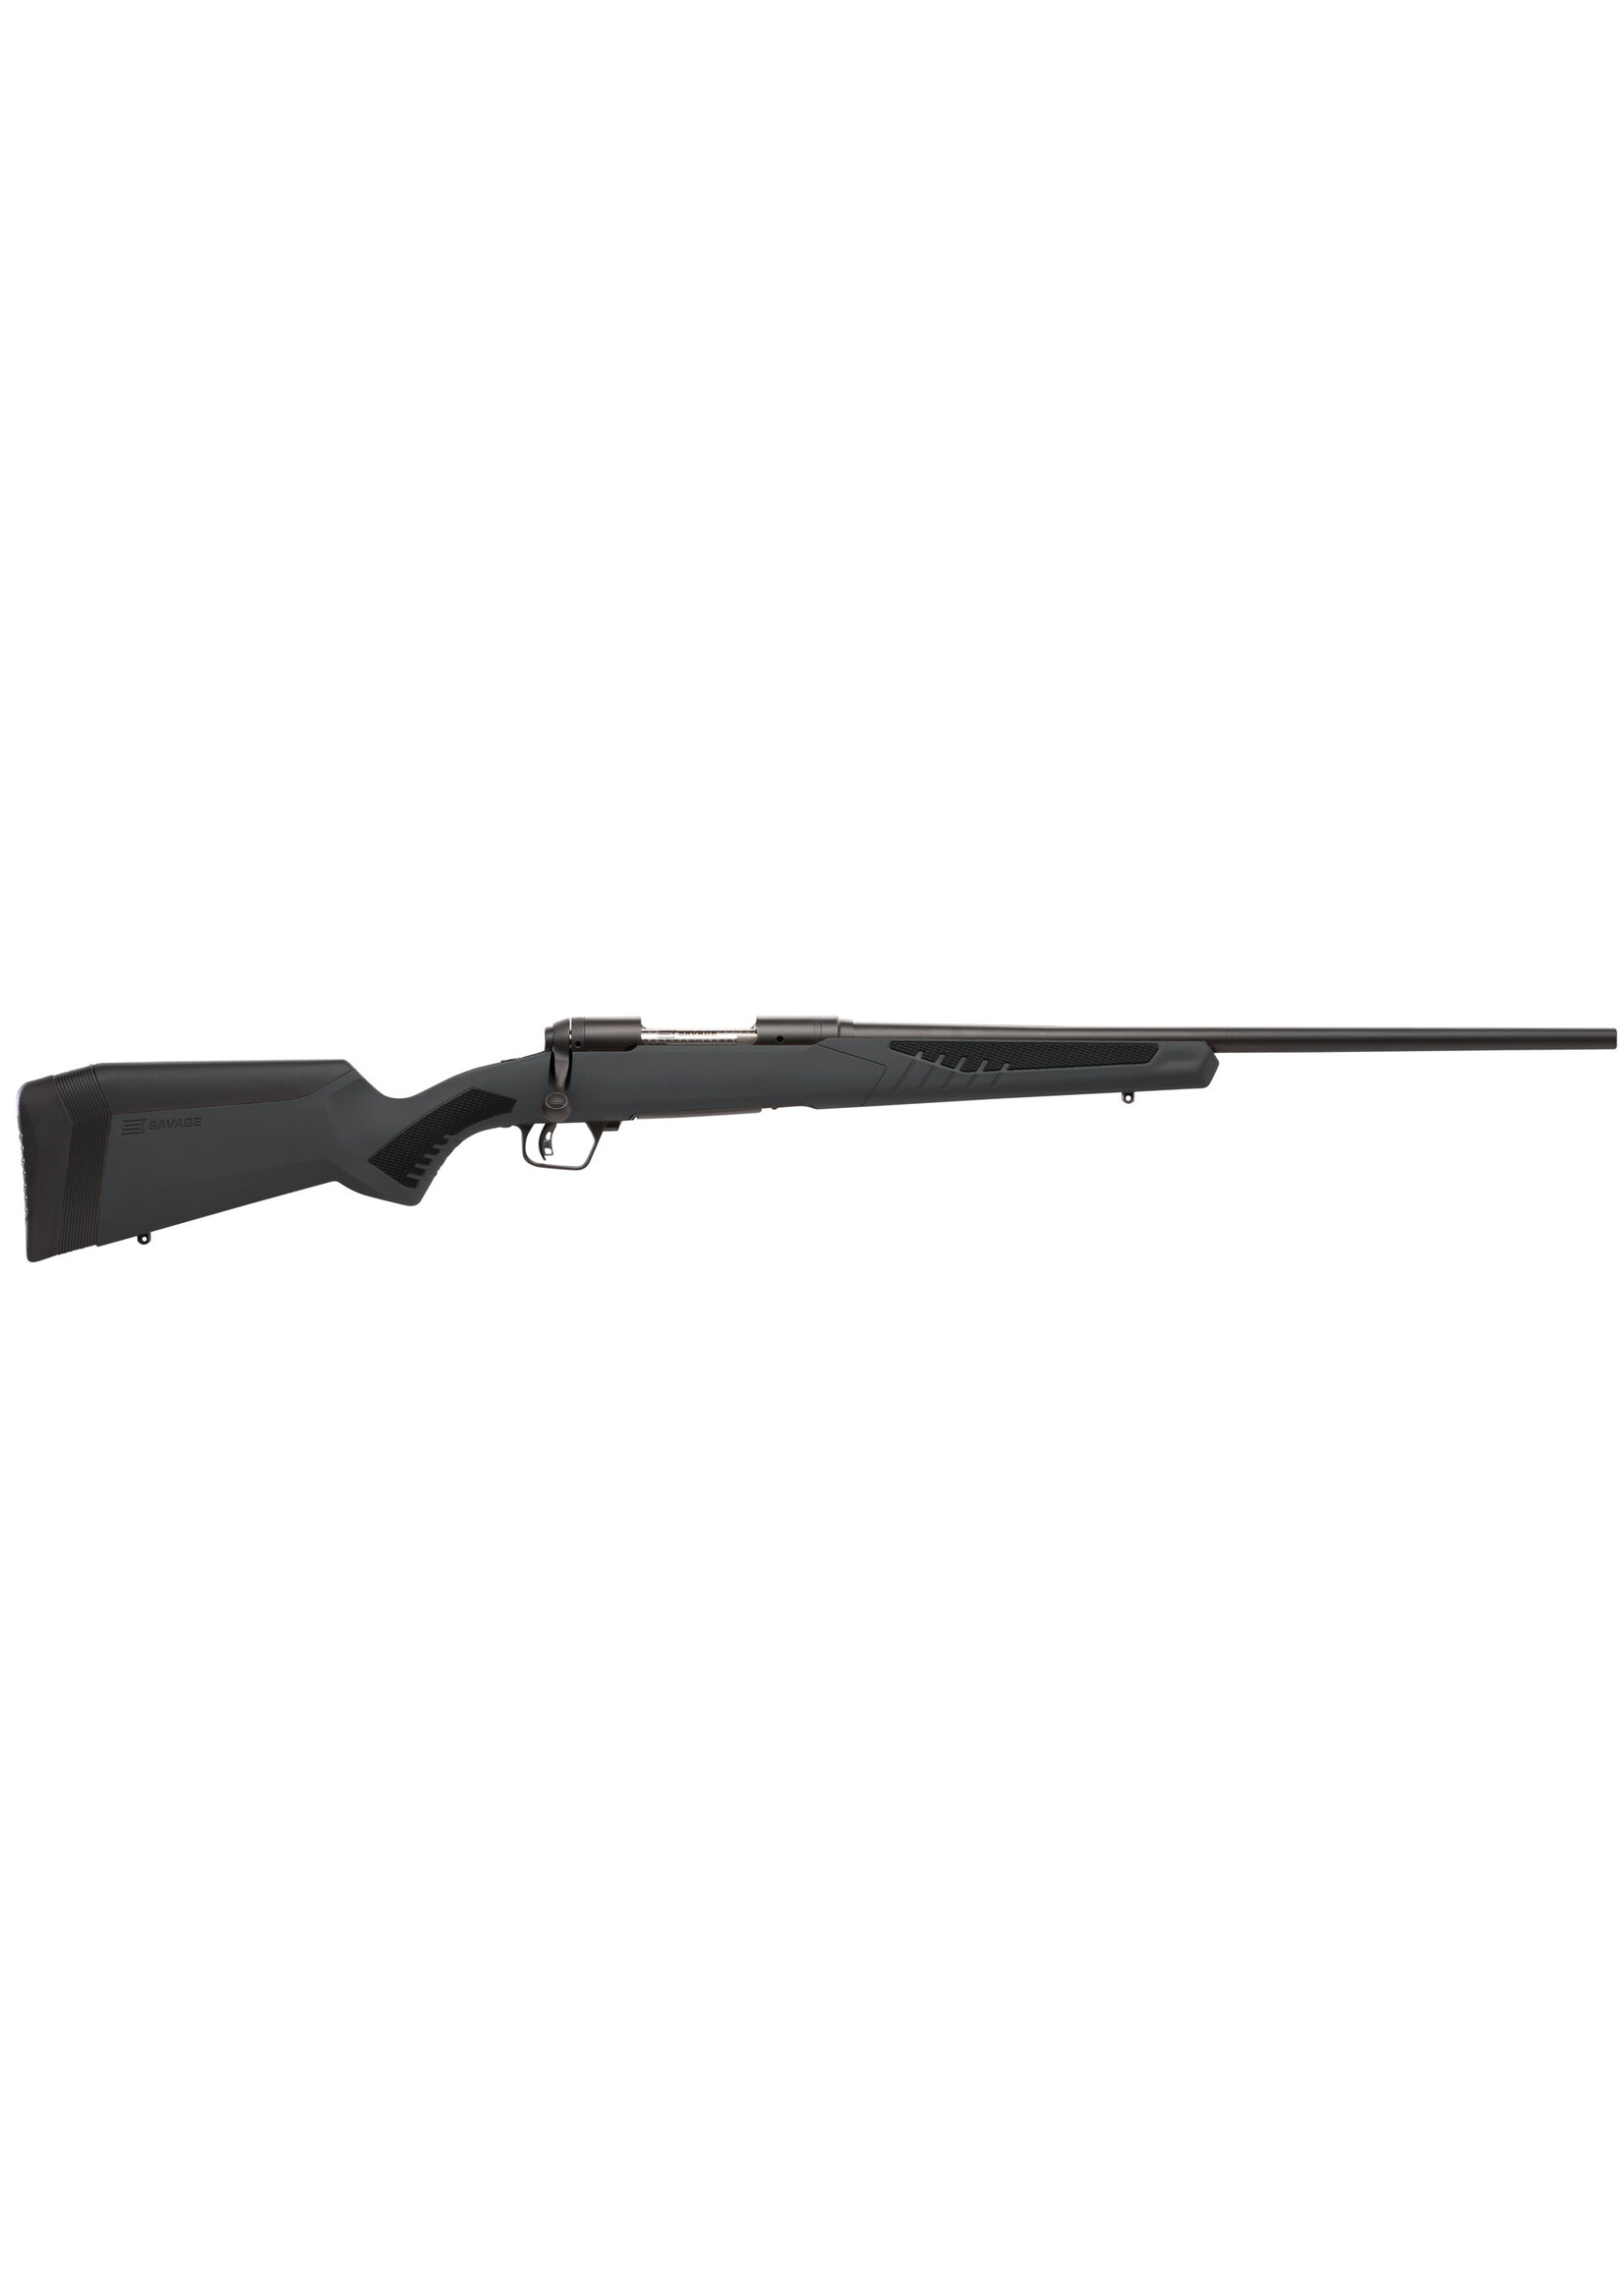 Savage Arms Savage, 110 Hunter, Bolt Action Rifle, Long Action, 30-06 Springfield, 22" Barrel , Matte Finish, Black, Gray Synthetic Stock, 1 Magazine, 4 Rounds, Right Hand